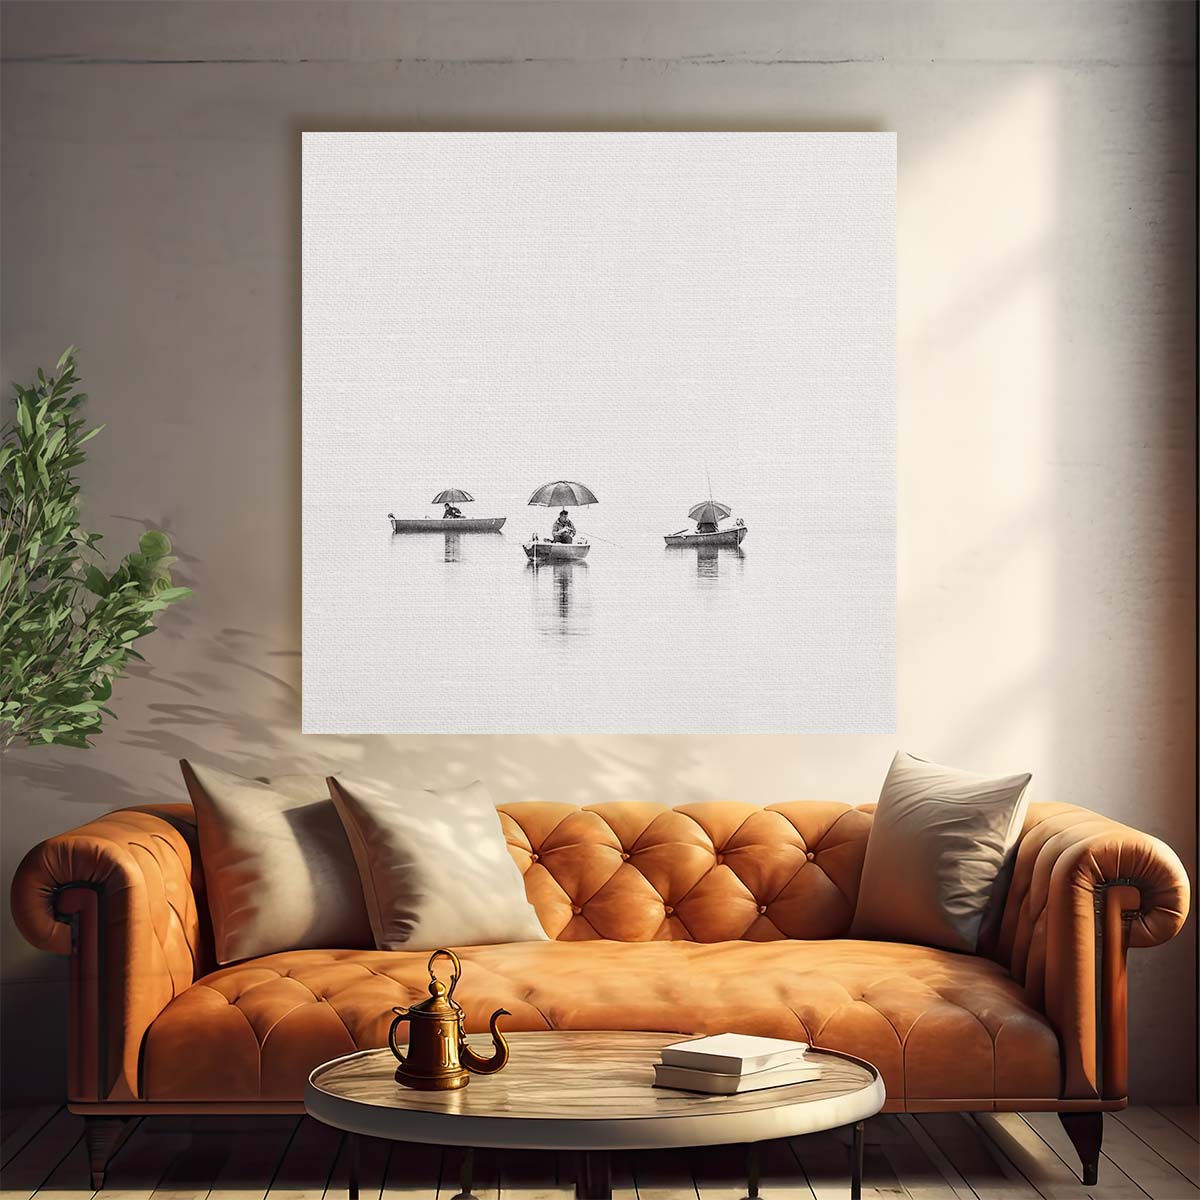 Serene Monochrome Lake Scene with Fishing Reflections & Rowboats Wall Art by Luxuriance Designs. Made in USA.